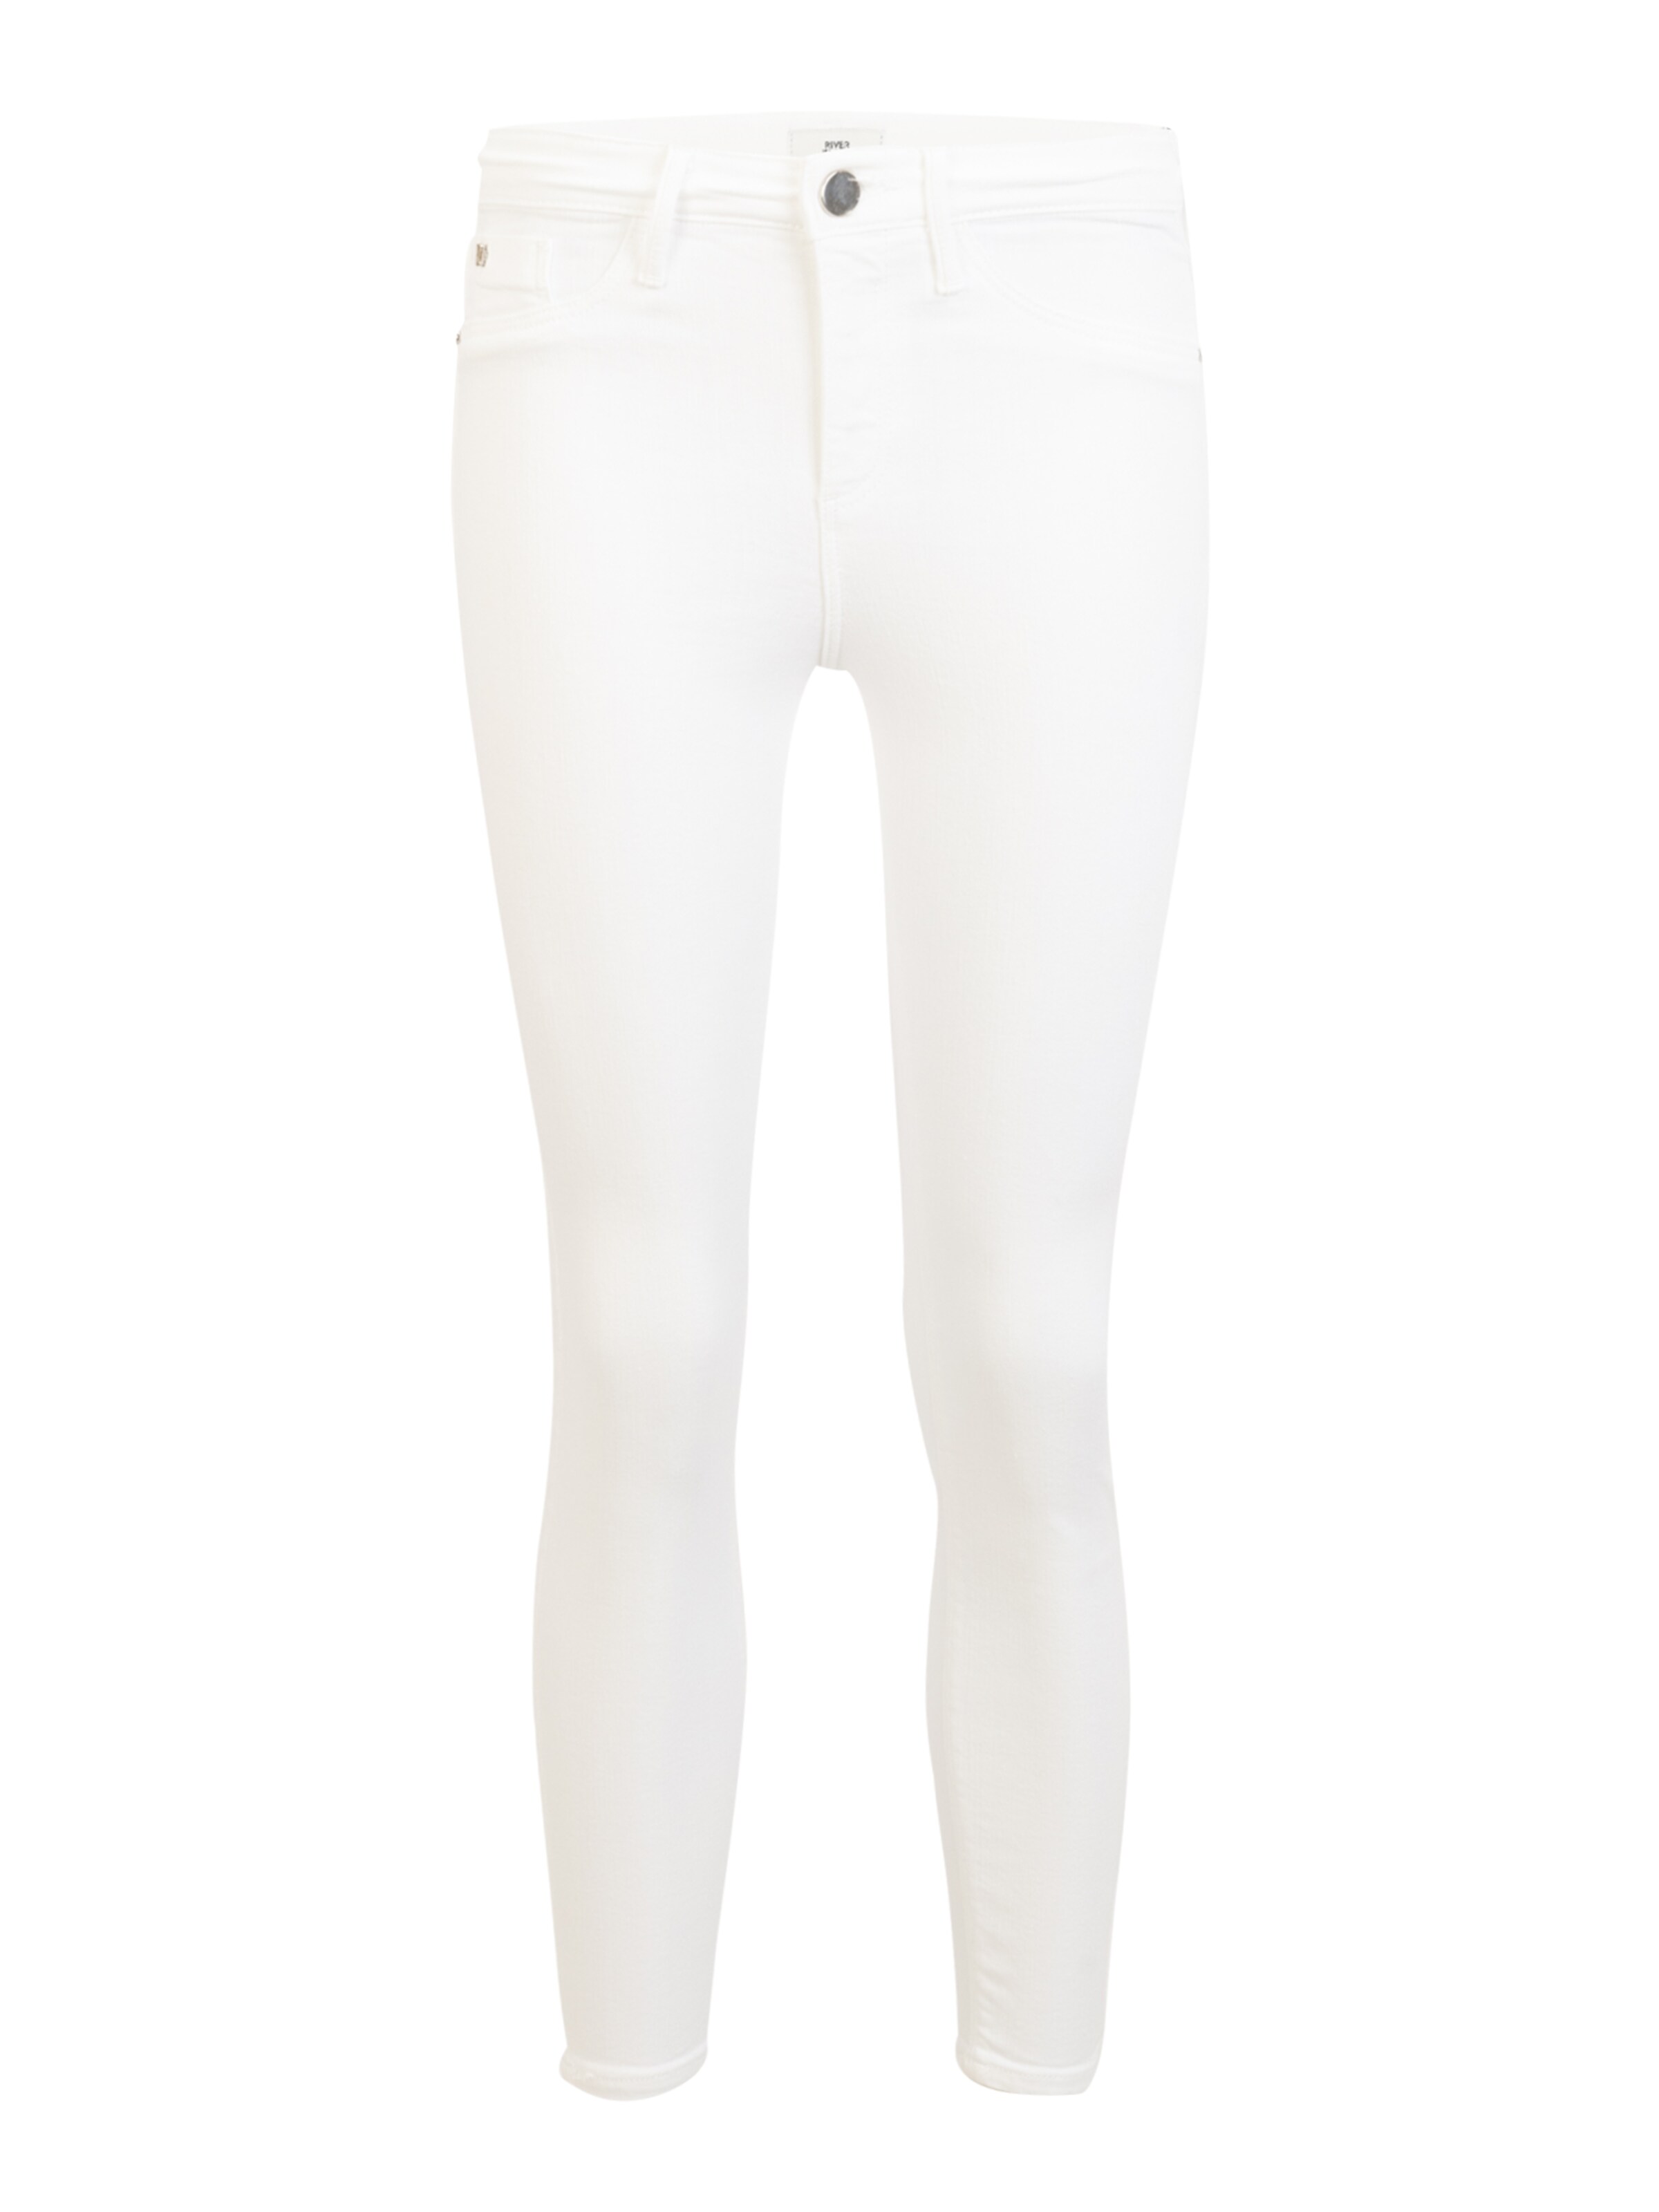 Jeans Donna River Island Petite Jeans Molly in Bianco 